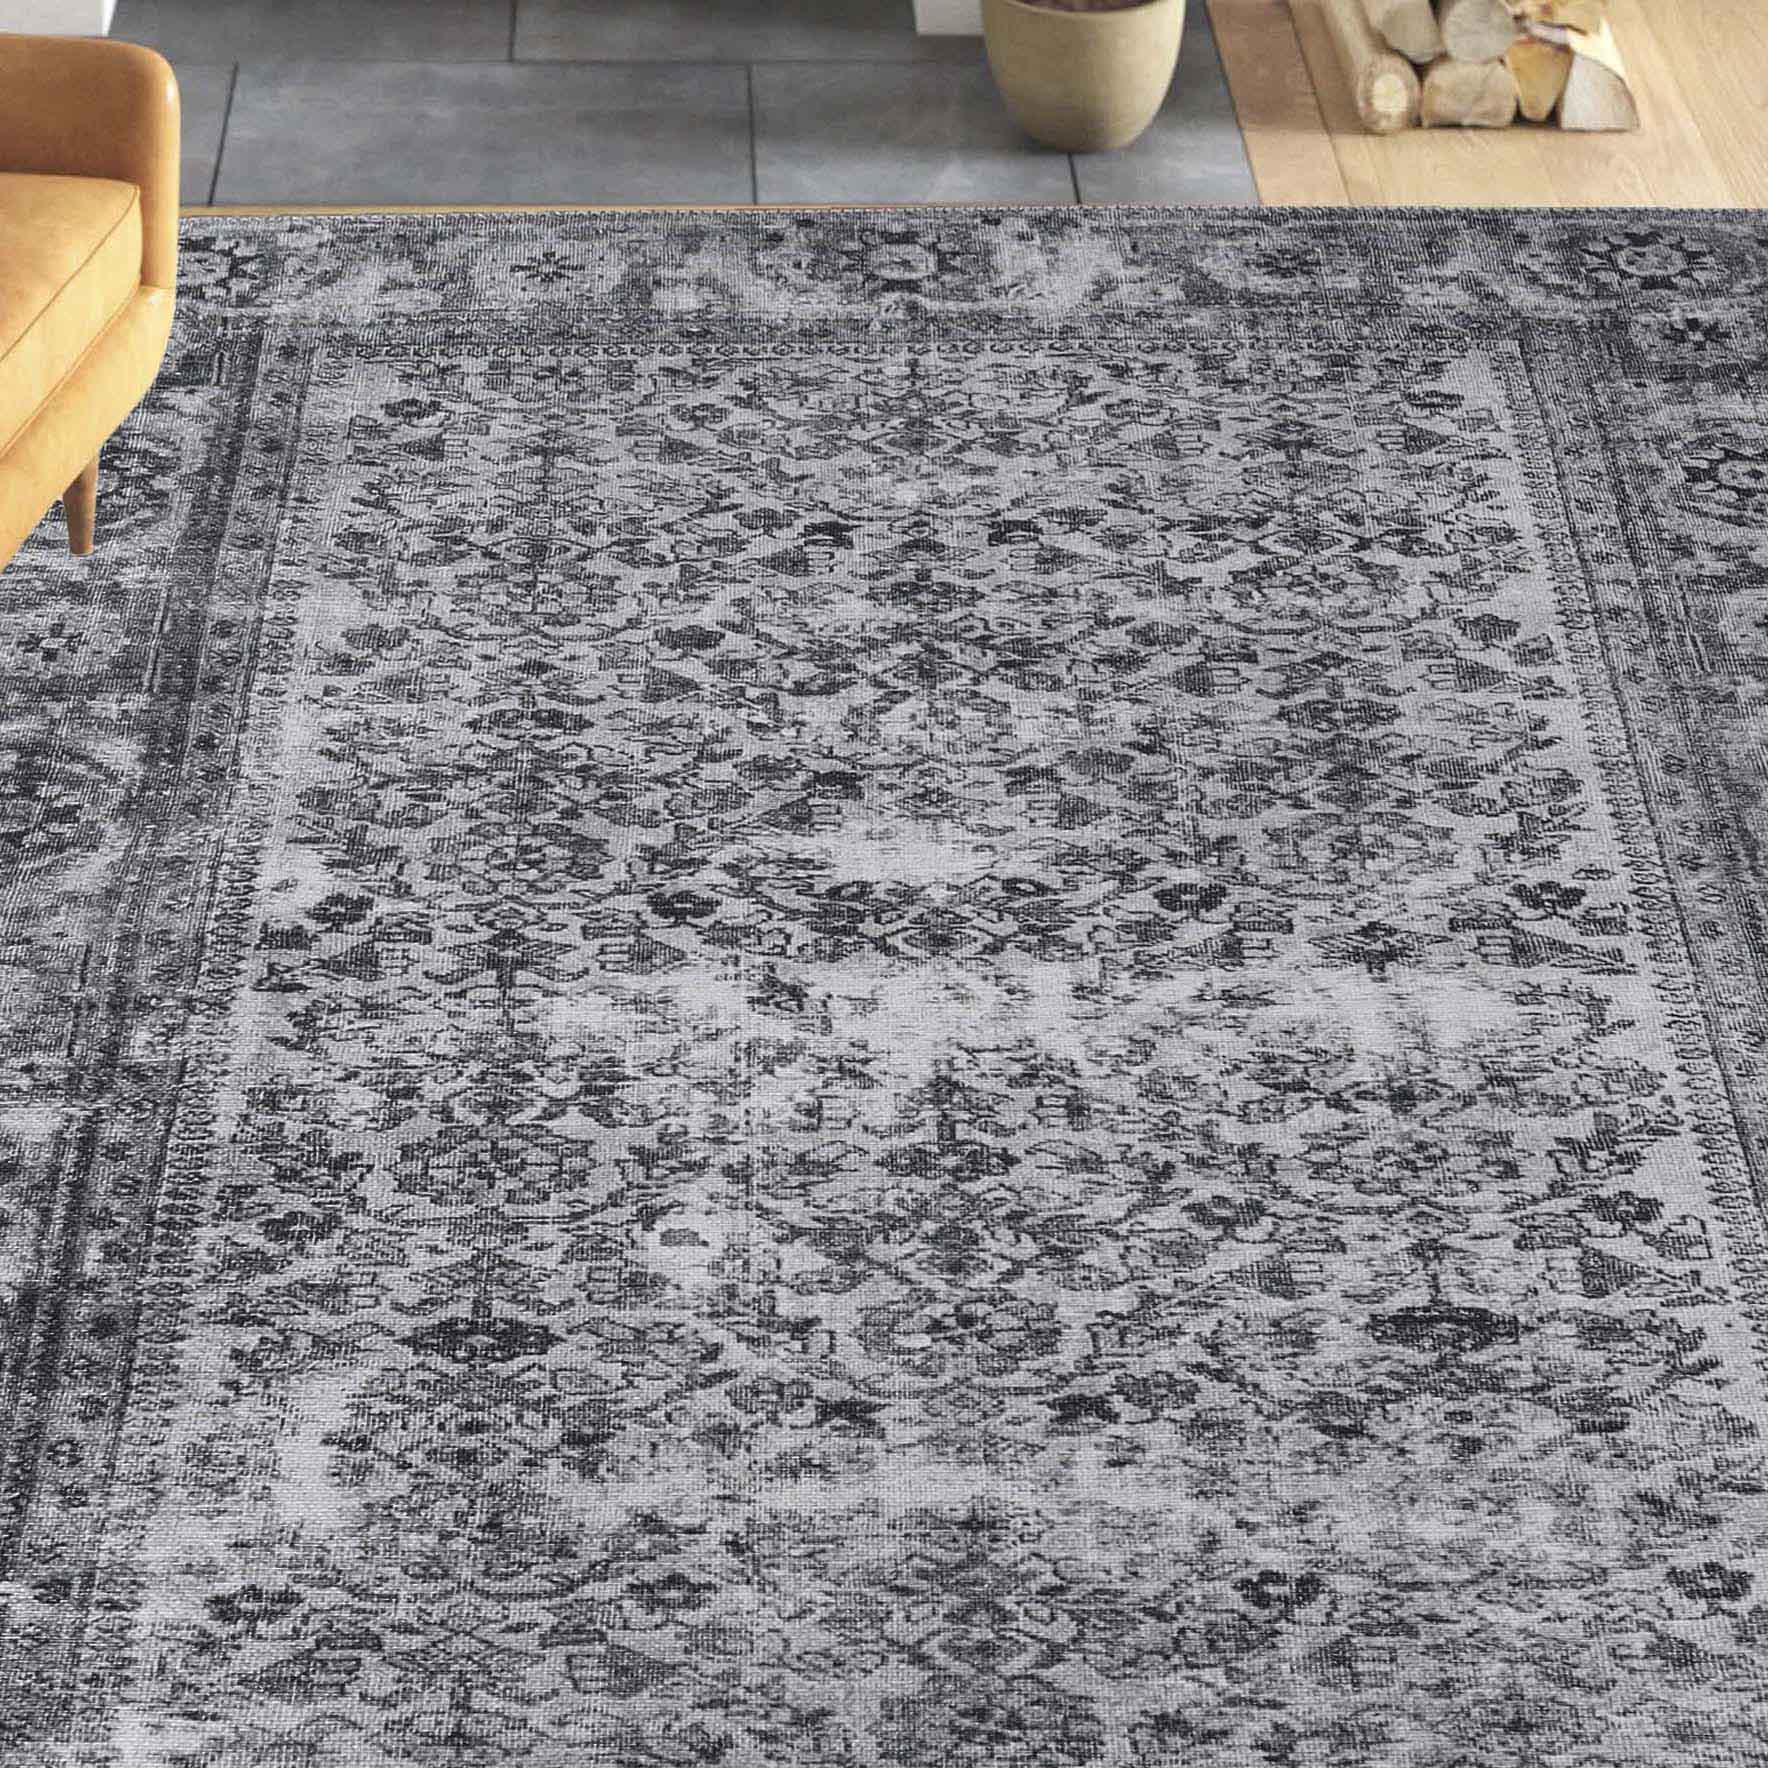 Classic Antique Floral Polyester Flat-weave Indoor Area Rug - Charcoal